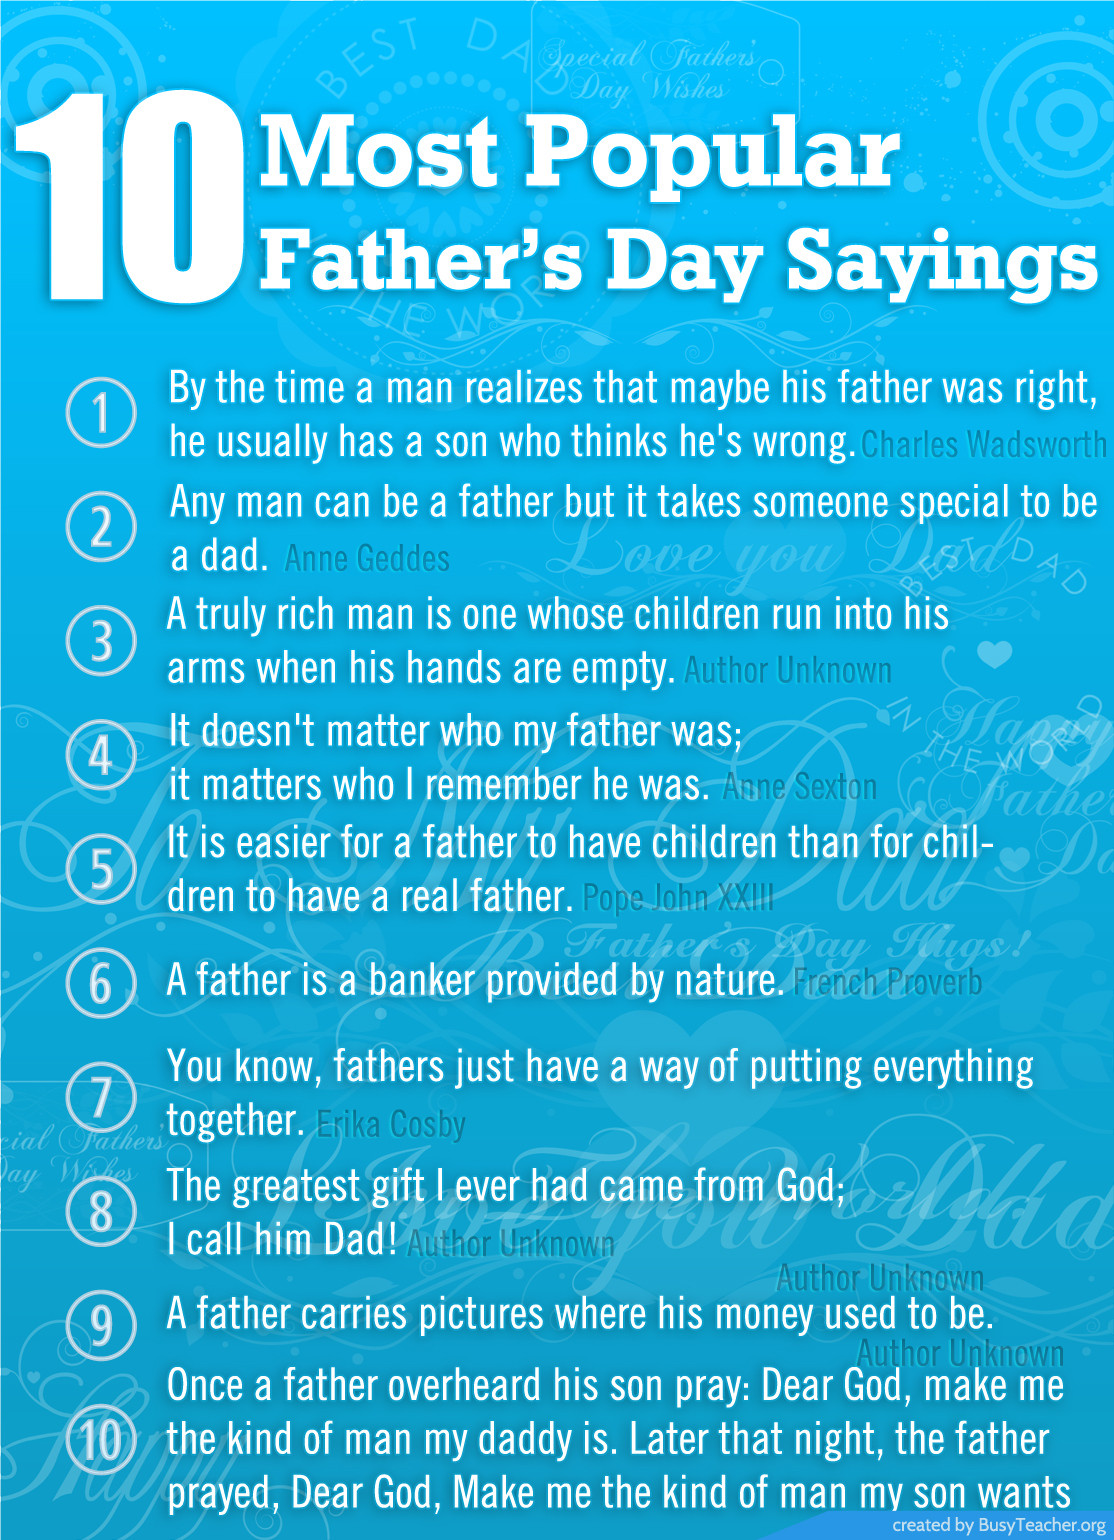 Quotes About Fathers Day
 Ten Popular Father’s Day Quotes